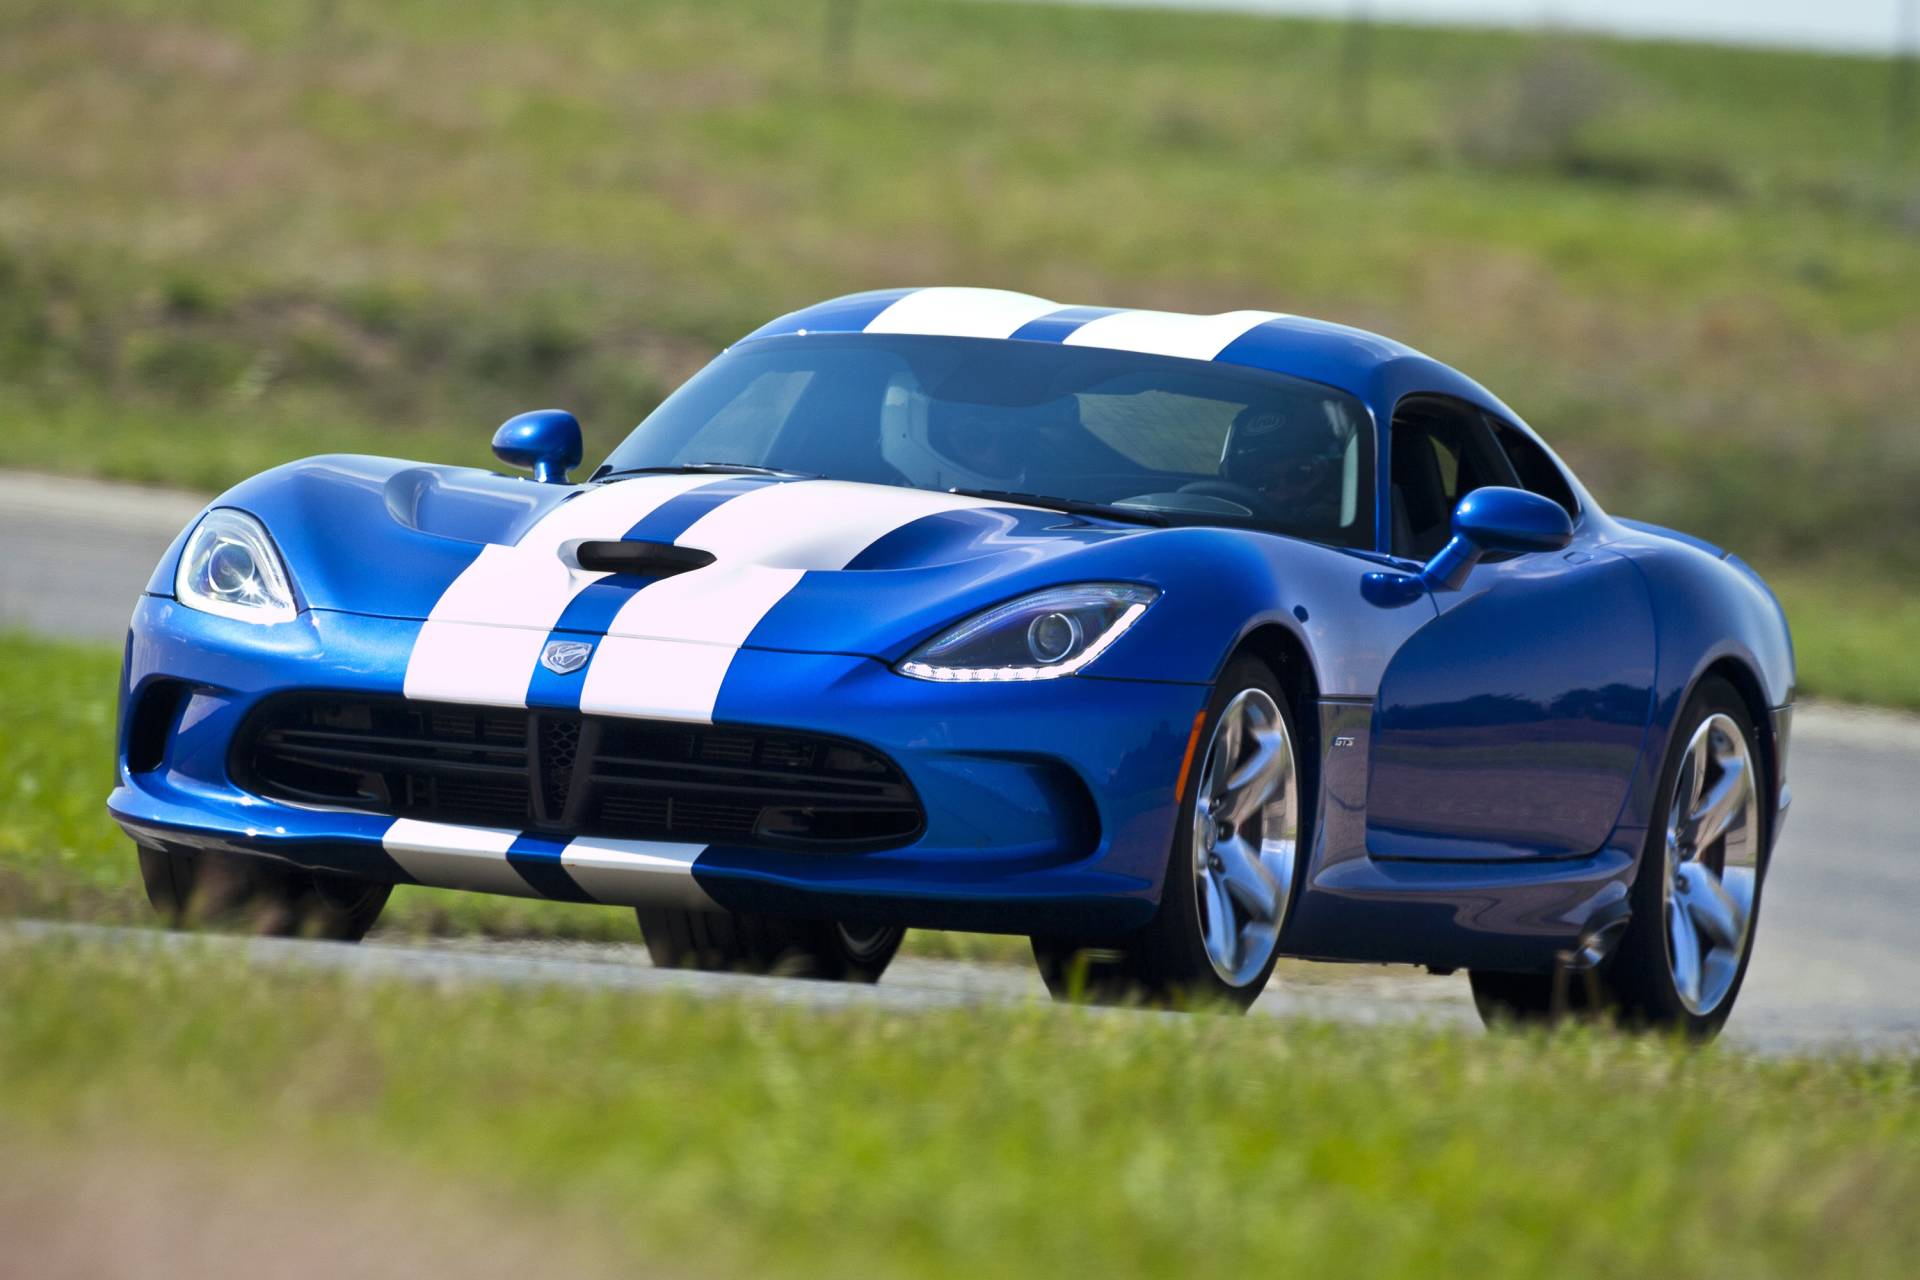 2013 Dodge Viper GTS Launch Edition Images. Photo: 2013-